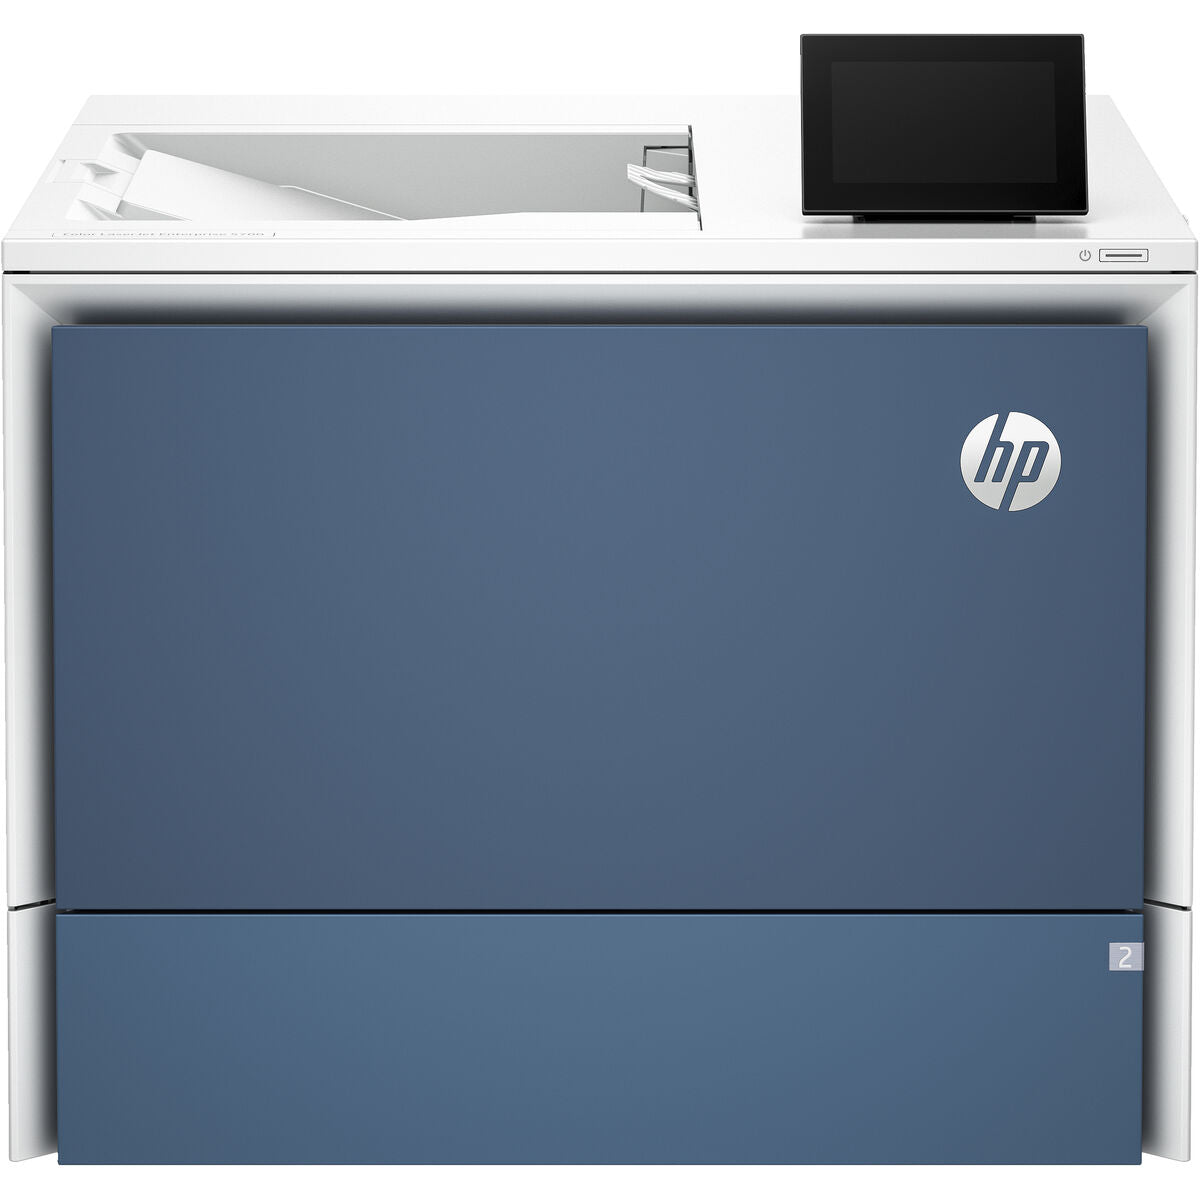 Printer HP 6QN28A#B19, HP, Computing, Printers and accessories, printer-hp-6qn28a-b19, Brand_HP, category-reference-2609, category-reference-2642, category-reference-2645, category-reference-t-19685, category-reference-t-19911, category-reference-t-21378, computers / peripherals, Condition_NEW, office, Price_800 - 900, Teleworking, RiotNook